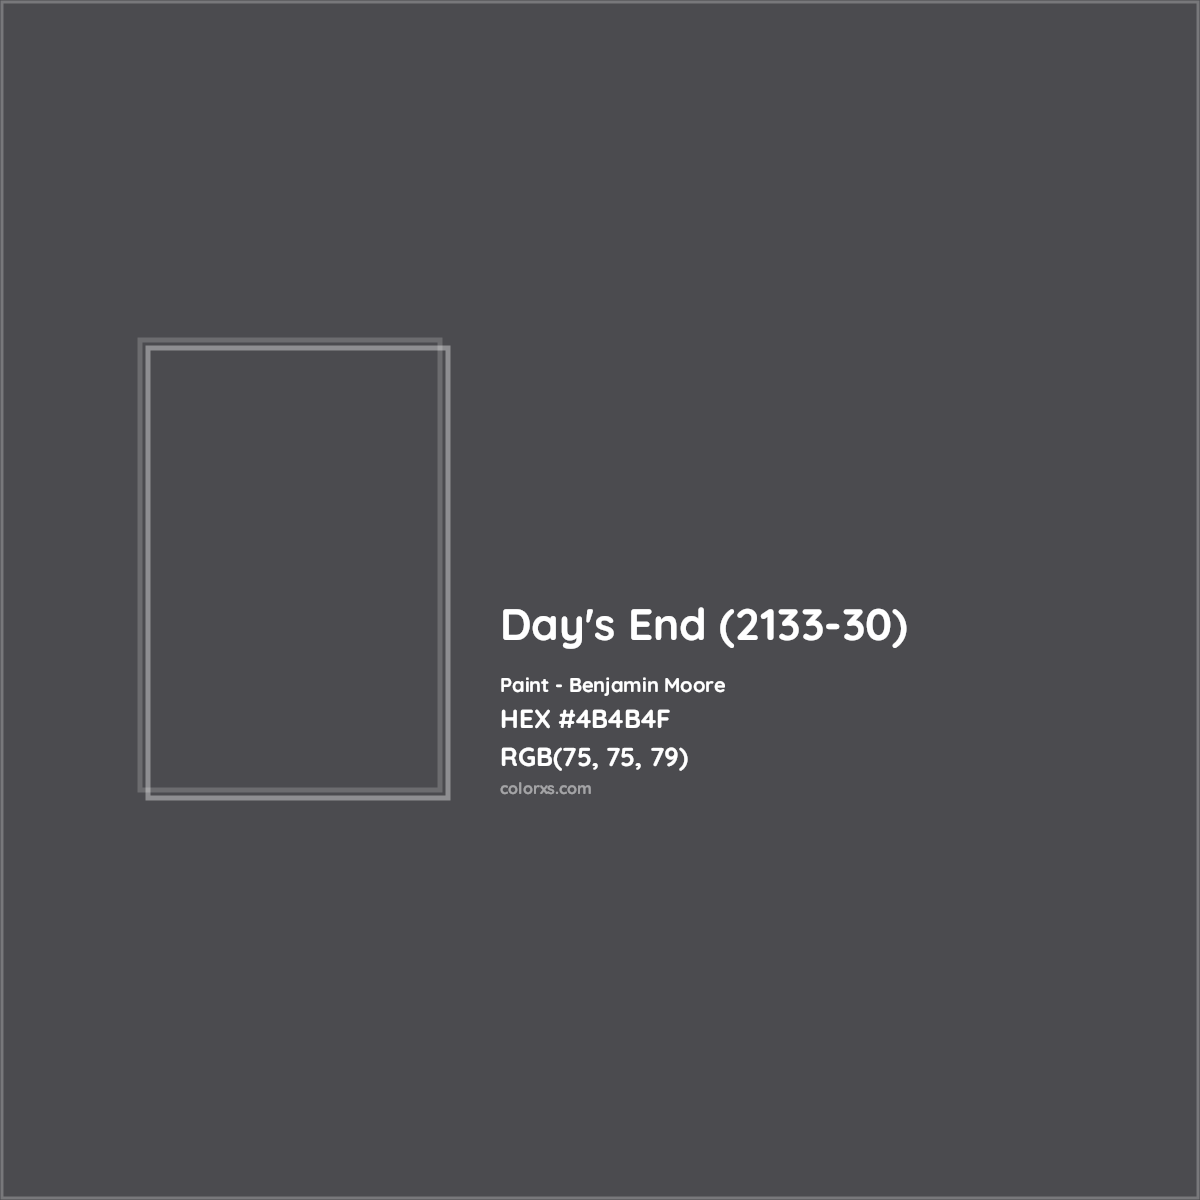 HEX #4B4B4F Day's End (2133-30) Paint Benjamin Moore - Color Code